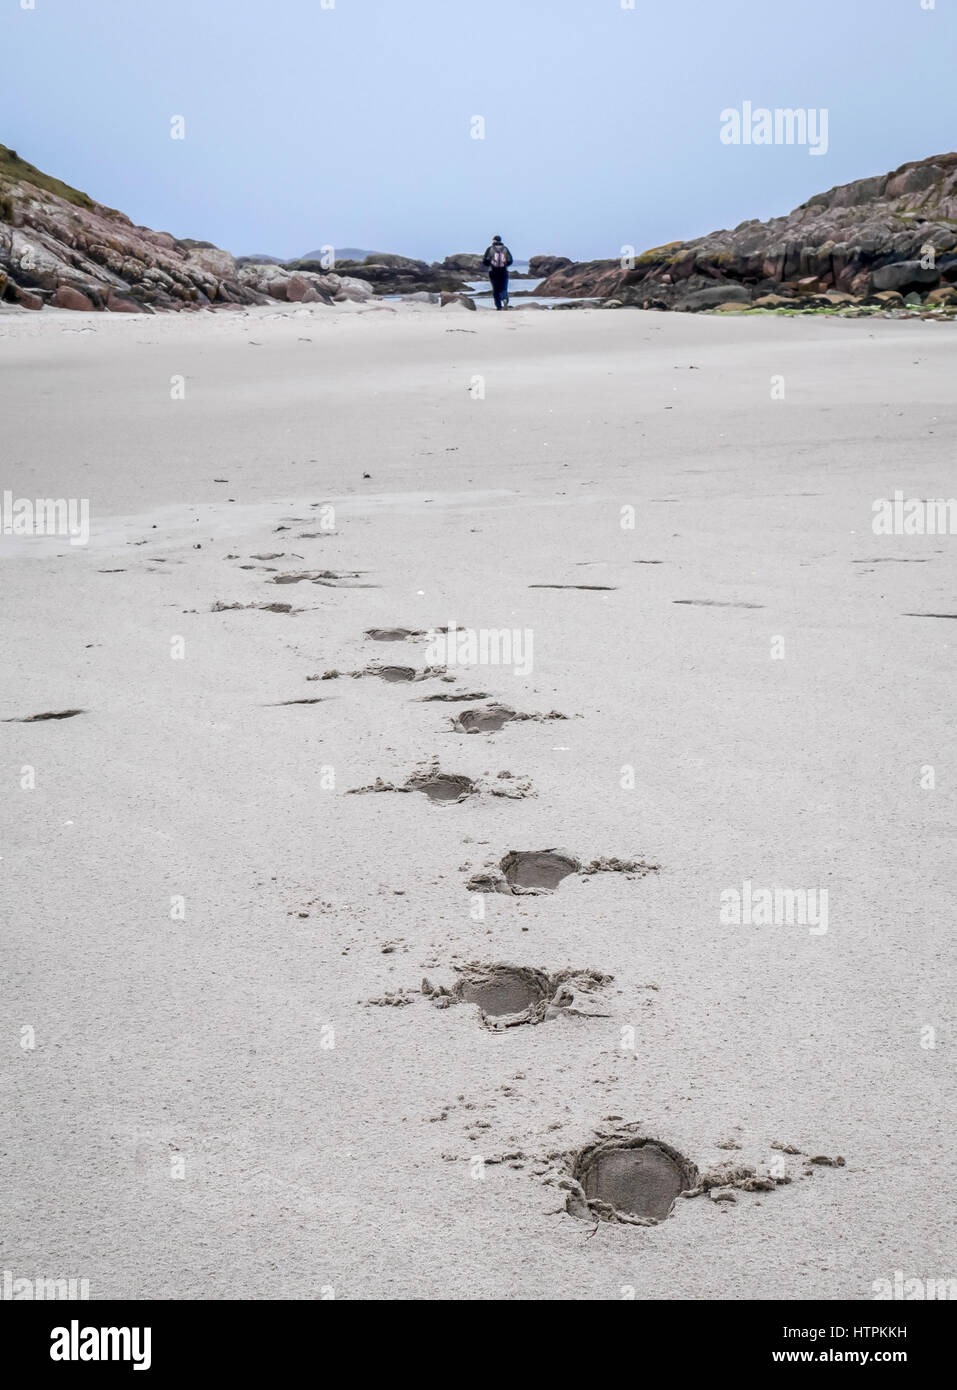 Footprints in white sand leading into distance with solitary man walking away, Isle of Mull, Scotland, UK Stock Photo